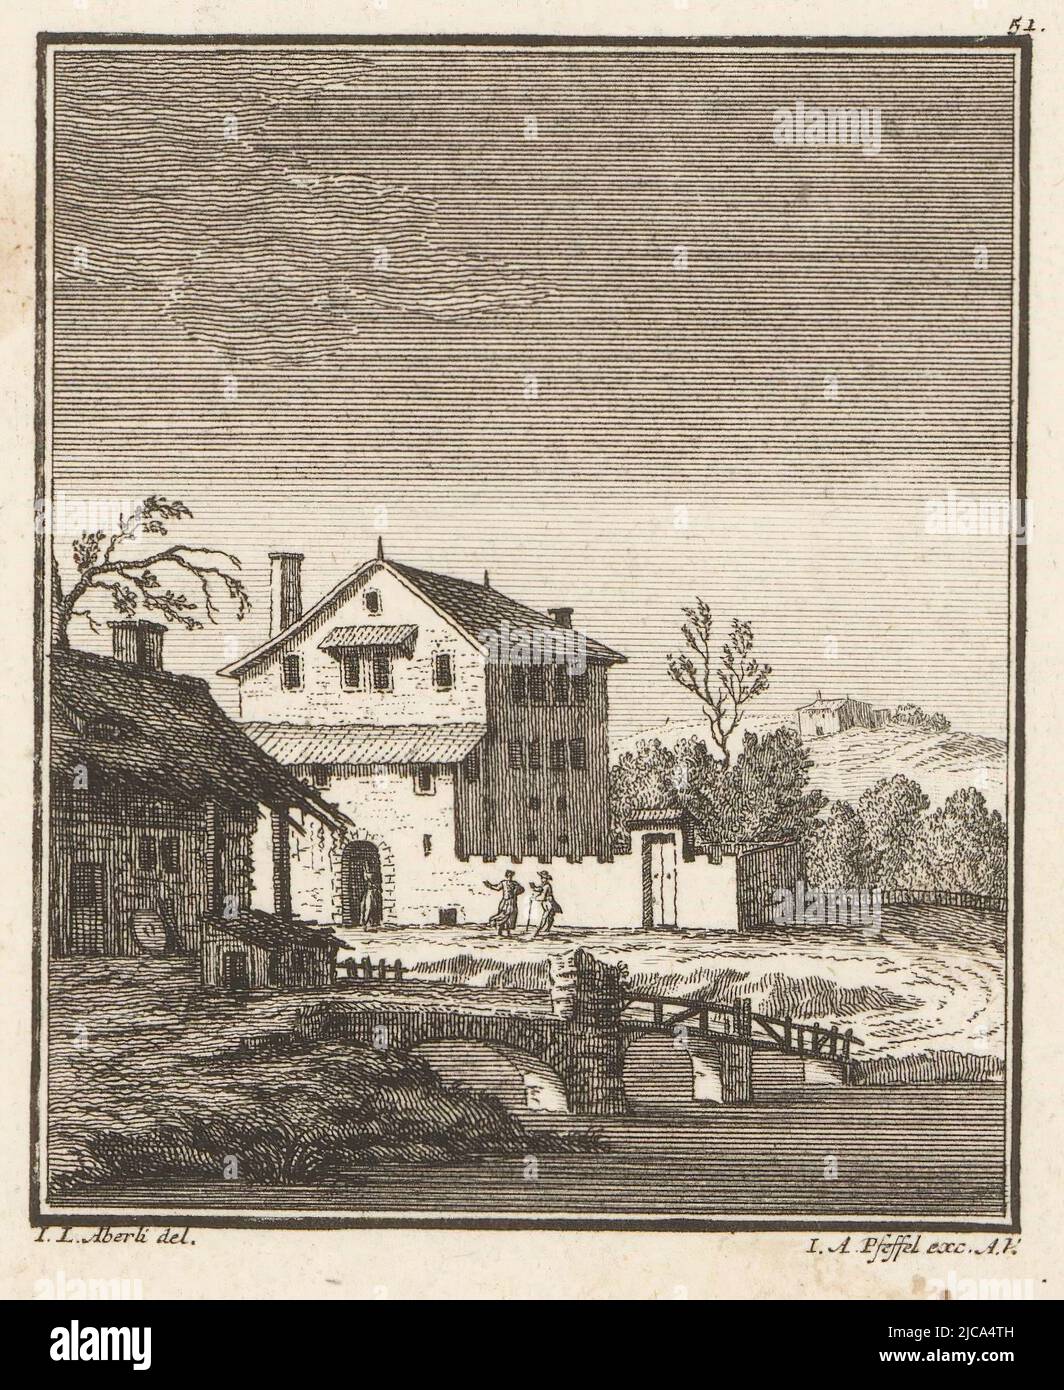 Top right printed number 51, print maker: Johann Andreas Pfeffel (der Jüngere), (mentioned on object), intermediary draughtsman: Johann Ludwig Aberli, (mentioned on object), 1733 - 1786, paper, etching, h 111 mm - w 98 mm Stock Photo